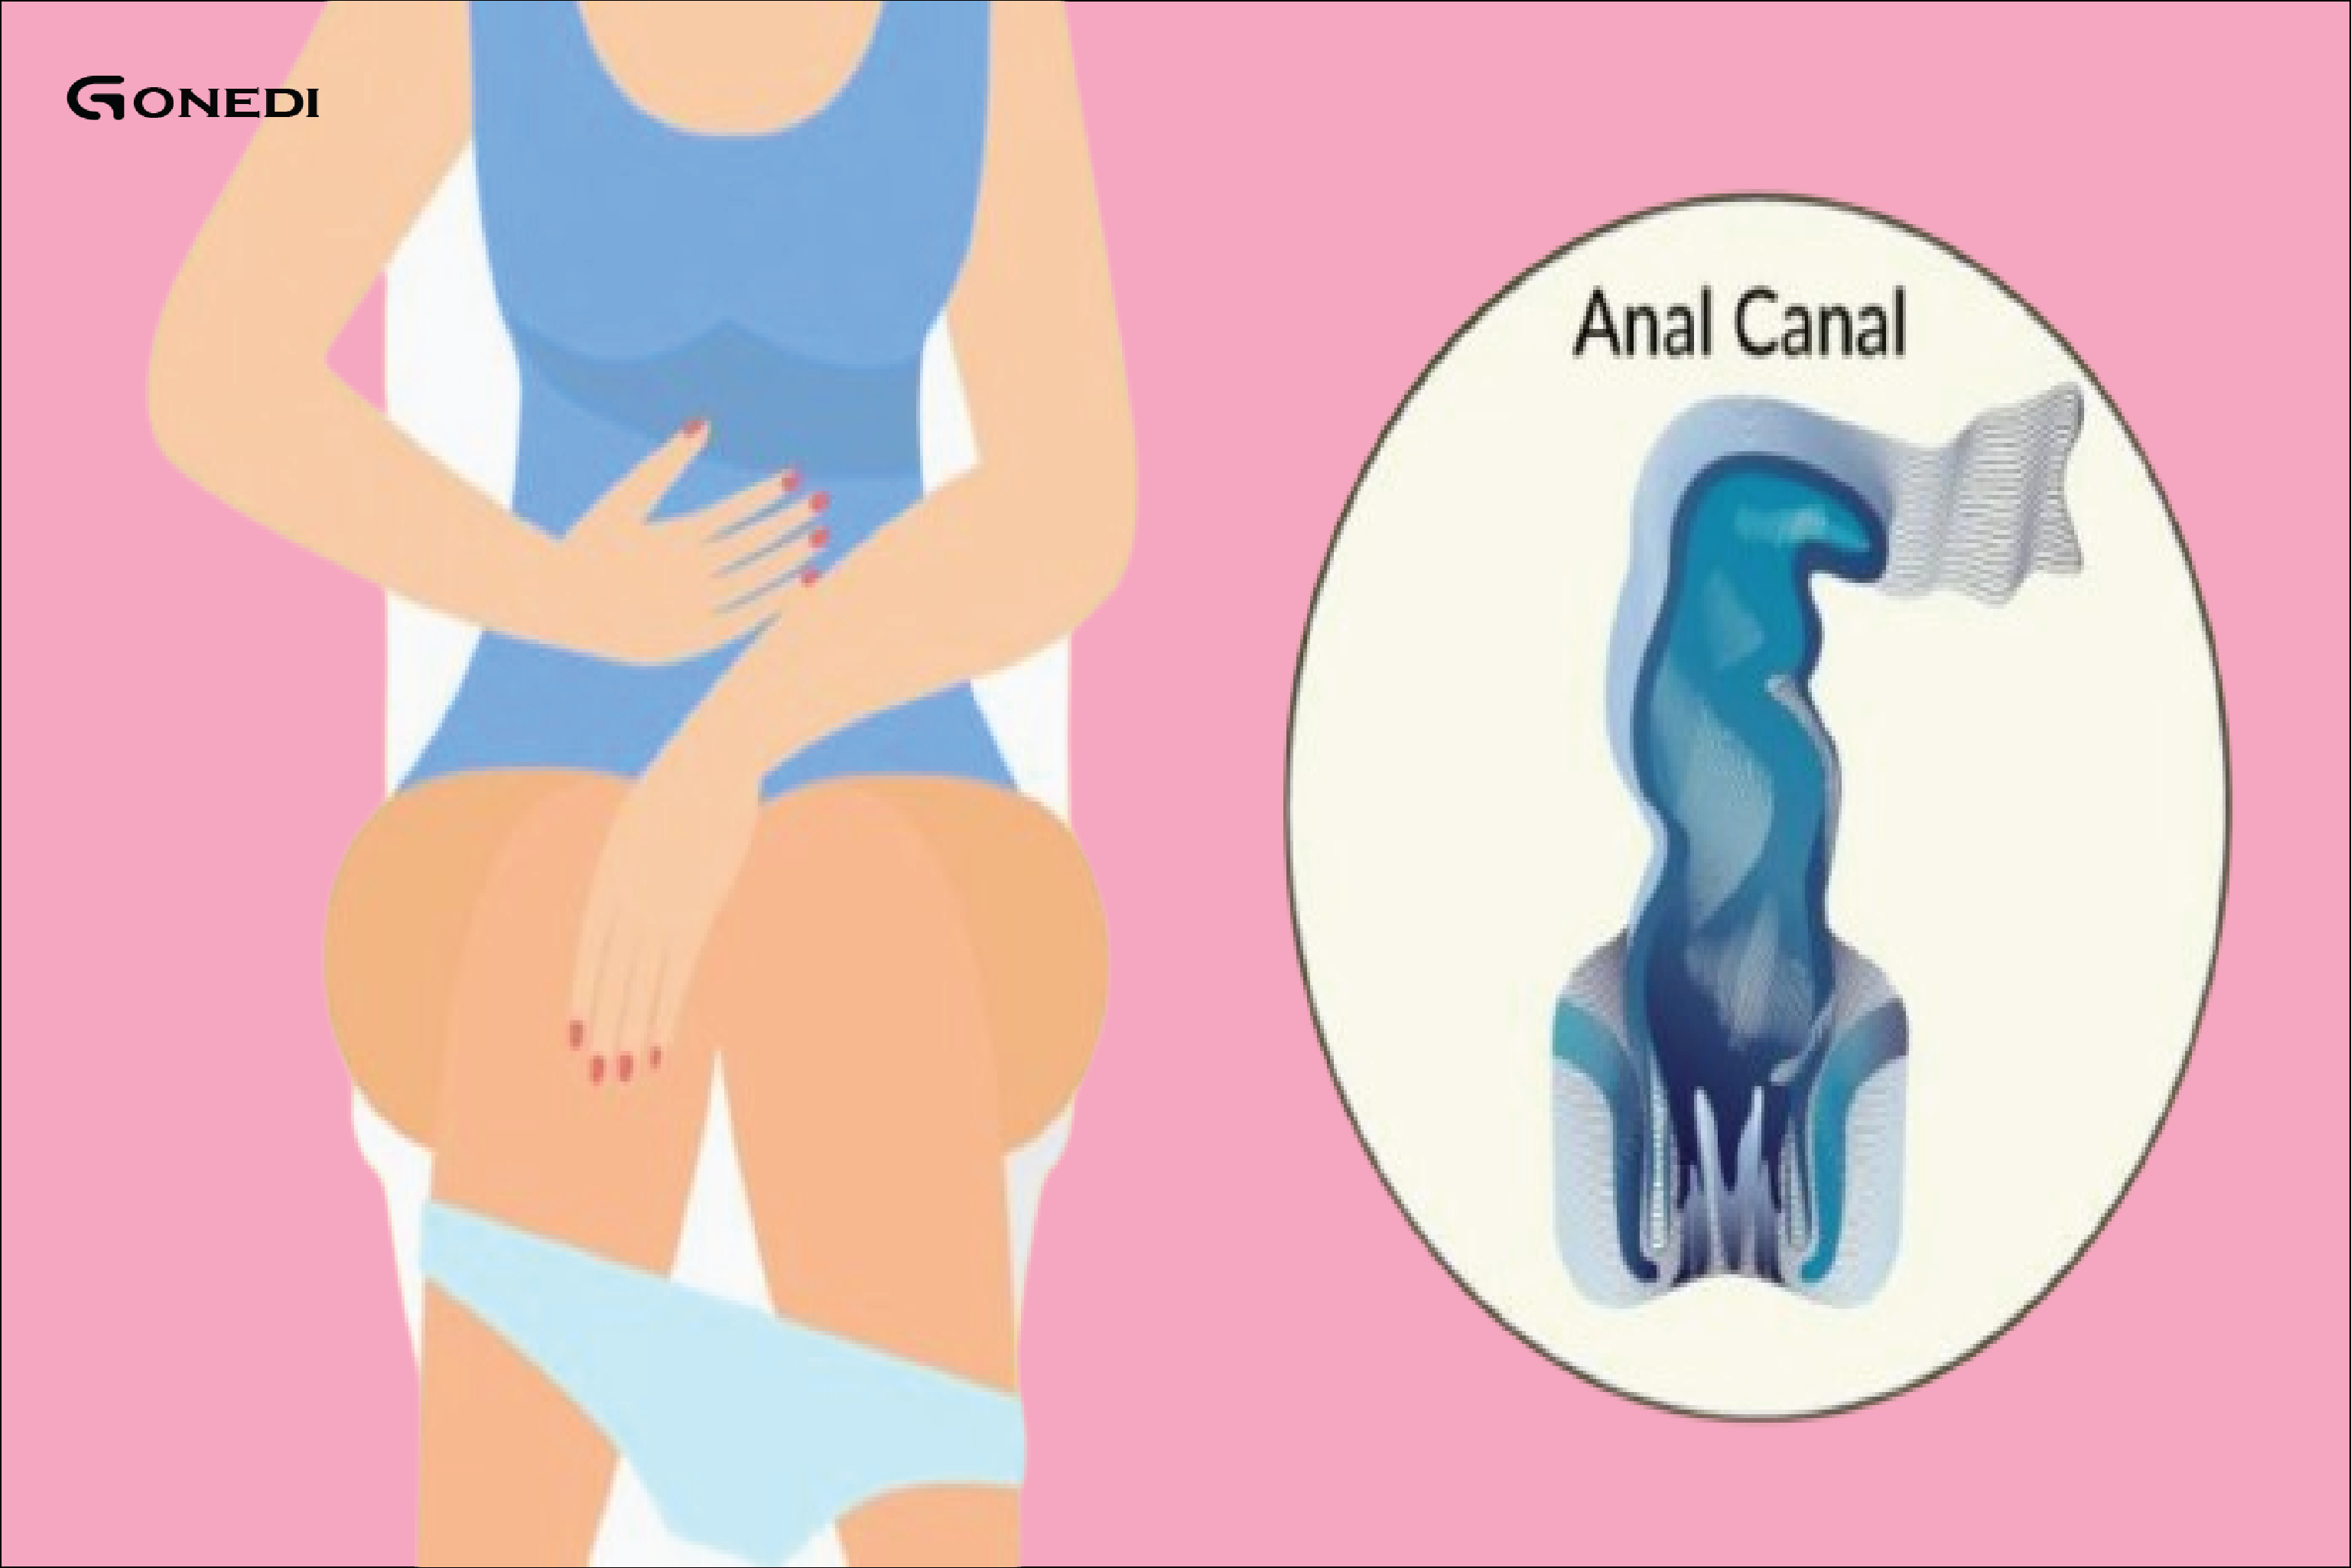 5 early warning signs of anal cancer that you shouldn’t feel embarrassed to talk about